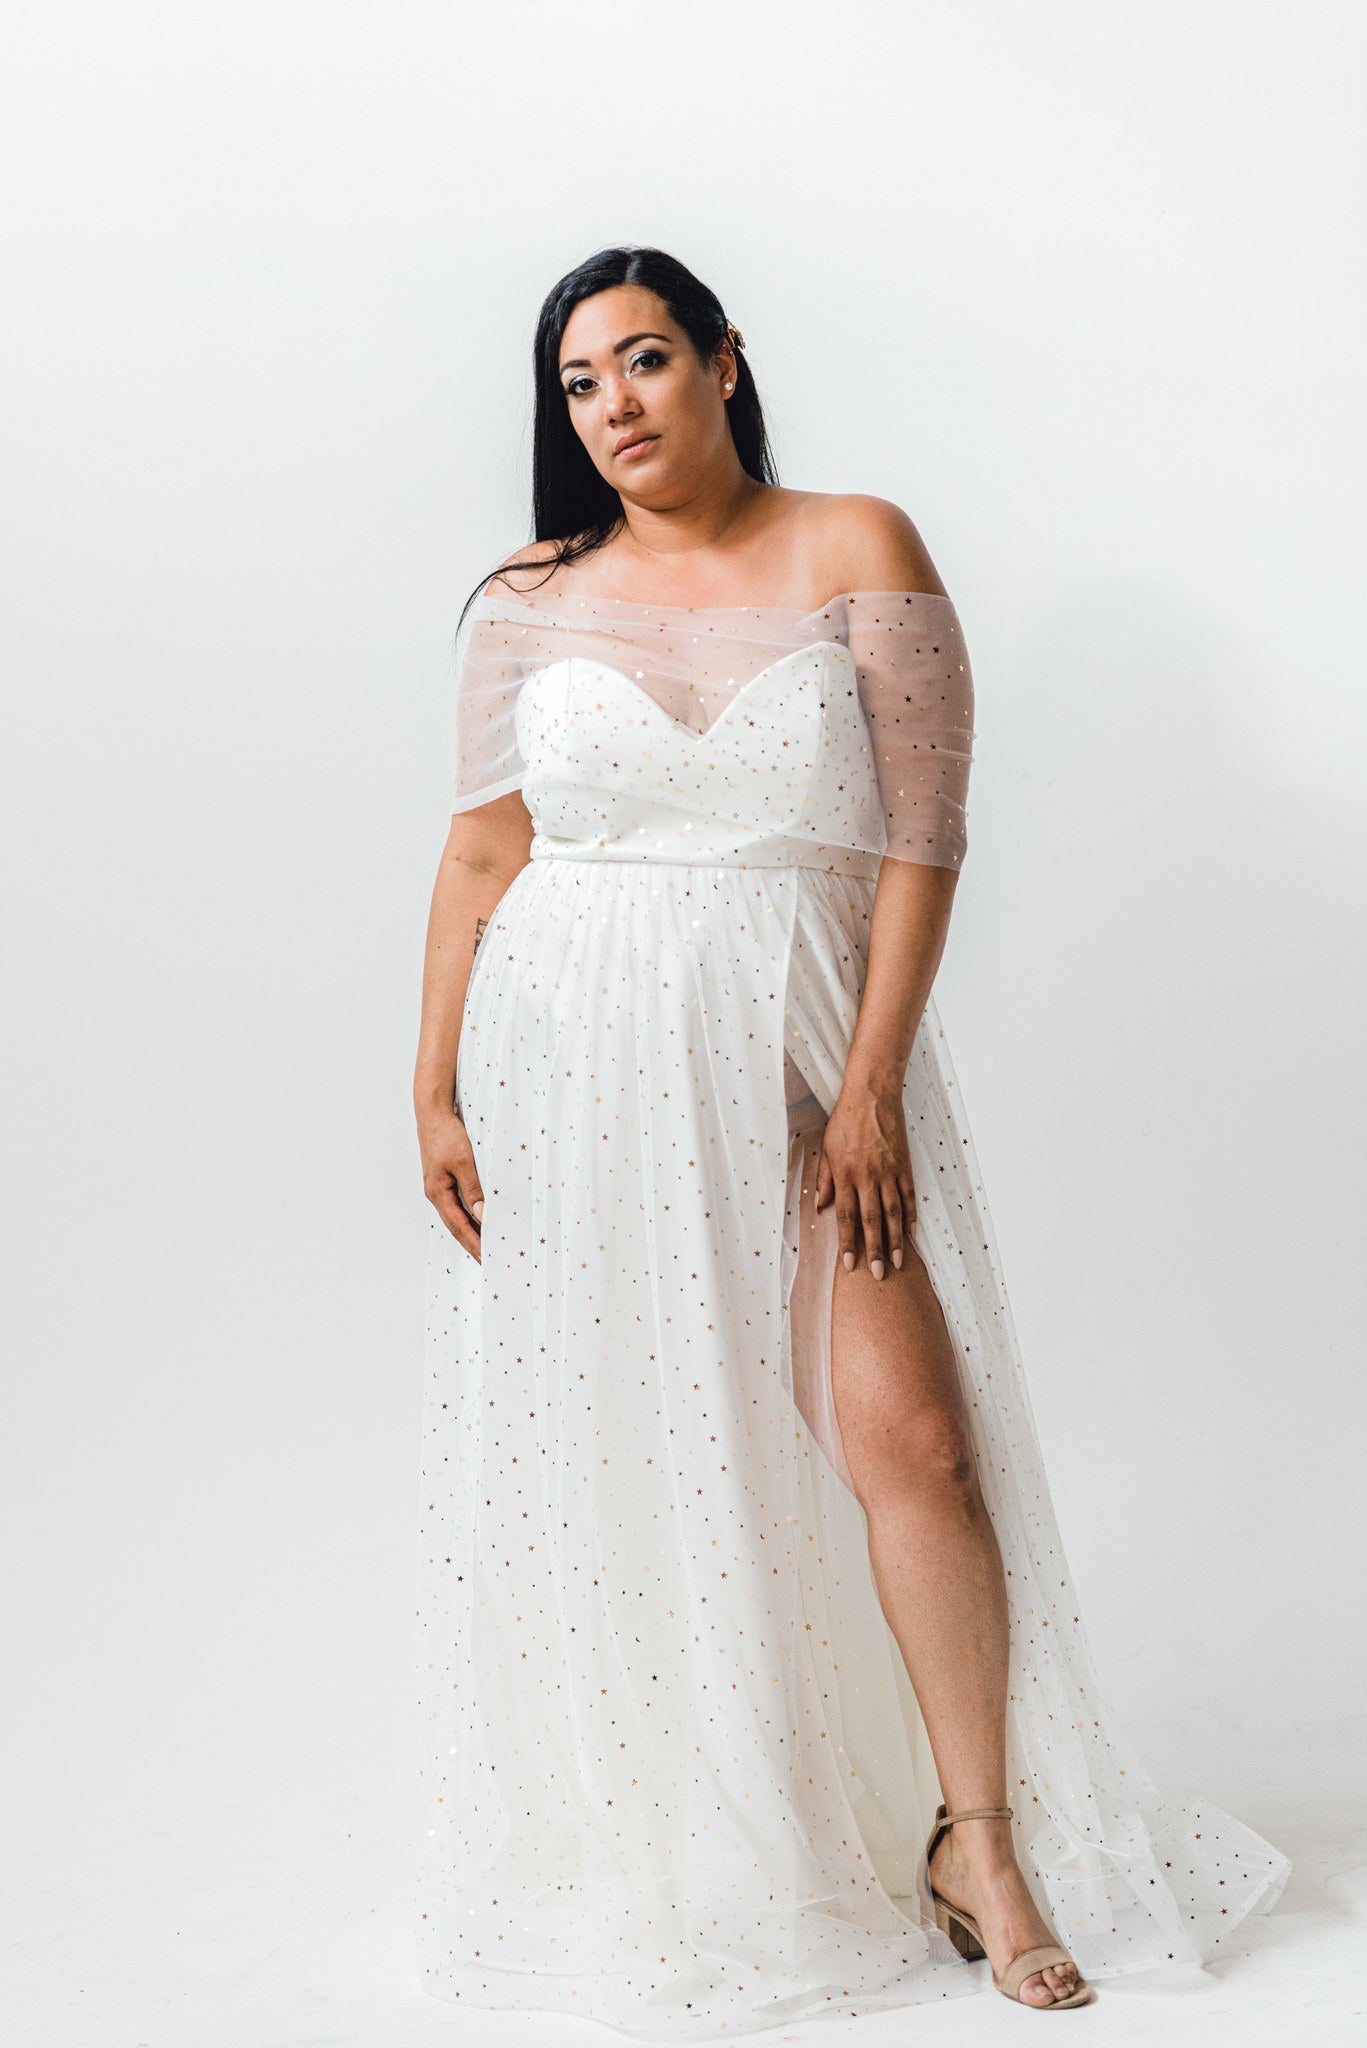 Size 14-16 Sample - Luna Gown